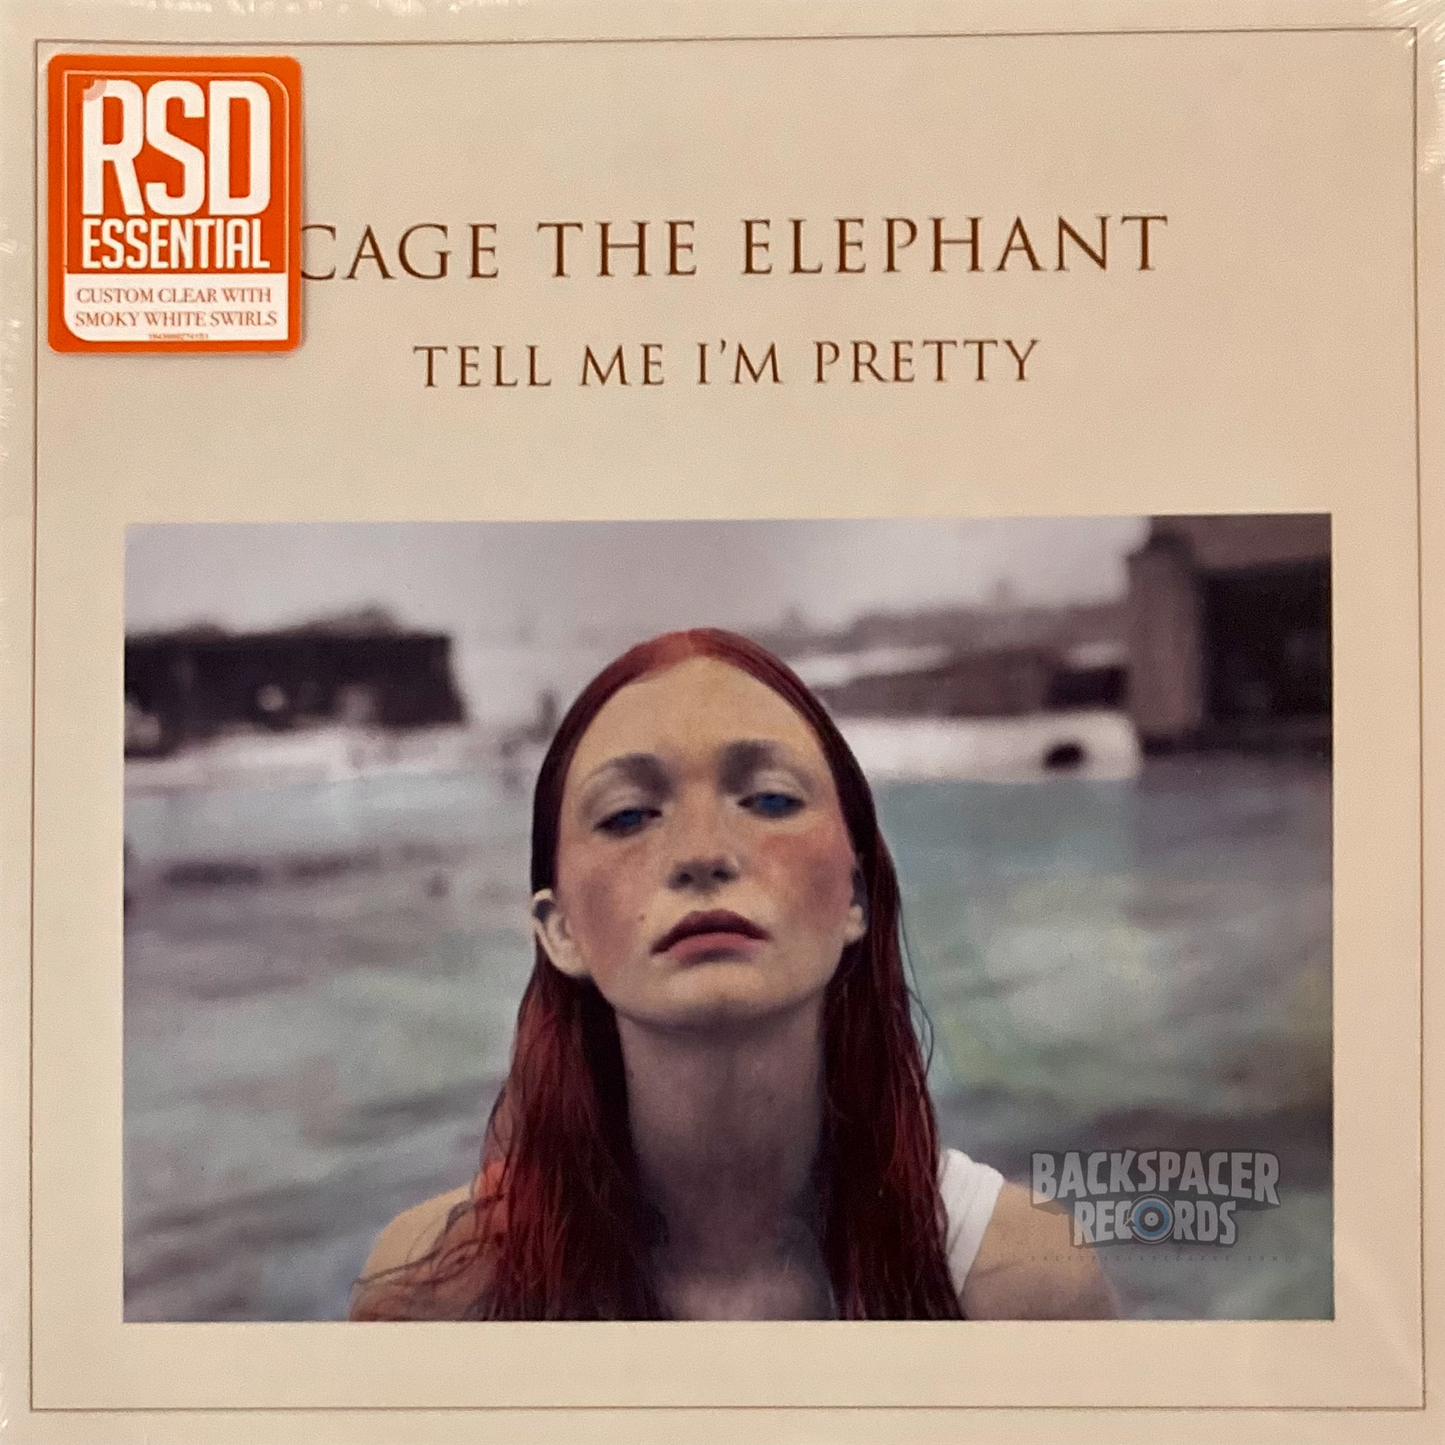 Cage The Elephant – Tell Me I'm Pretty (Limited Edition) LP (Sealed)